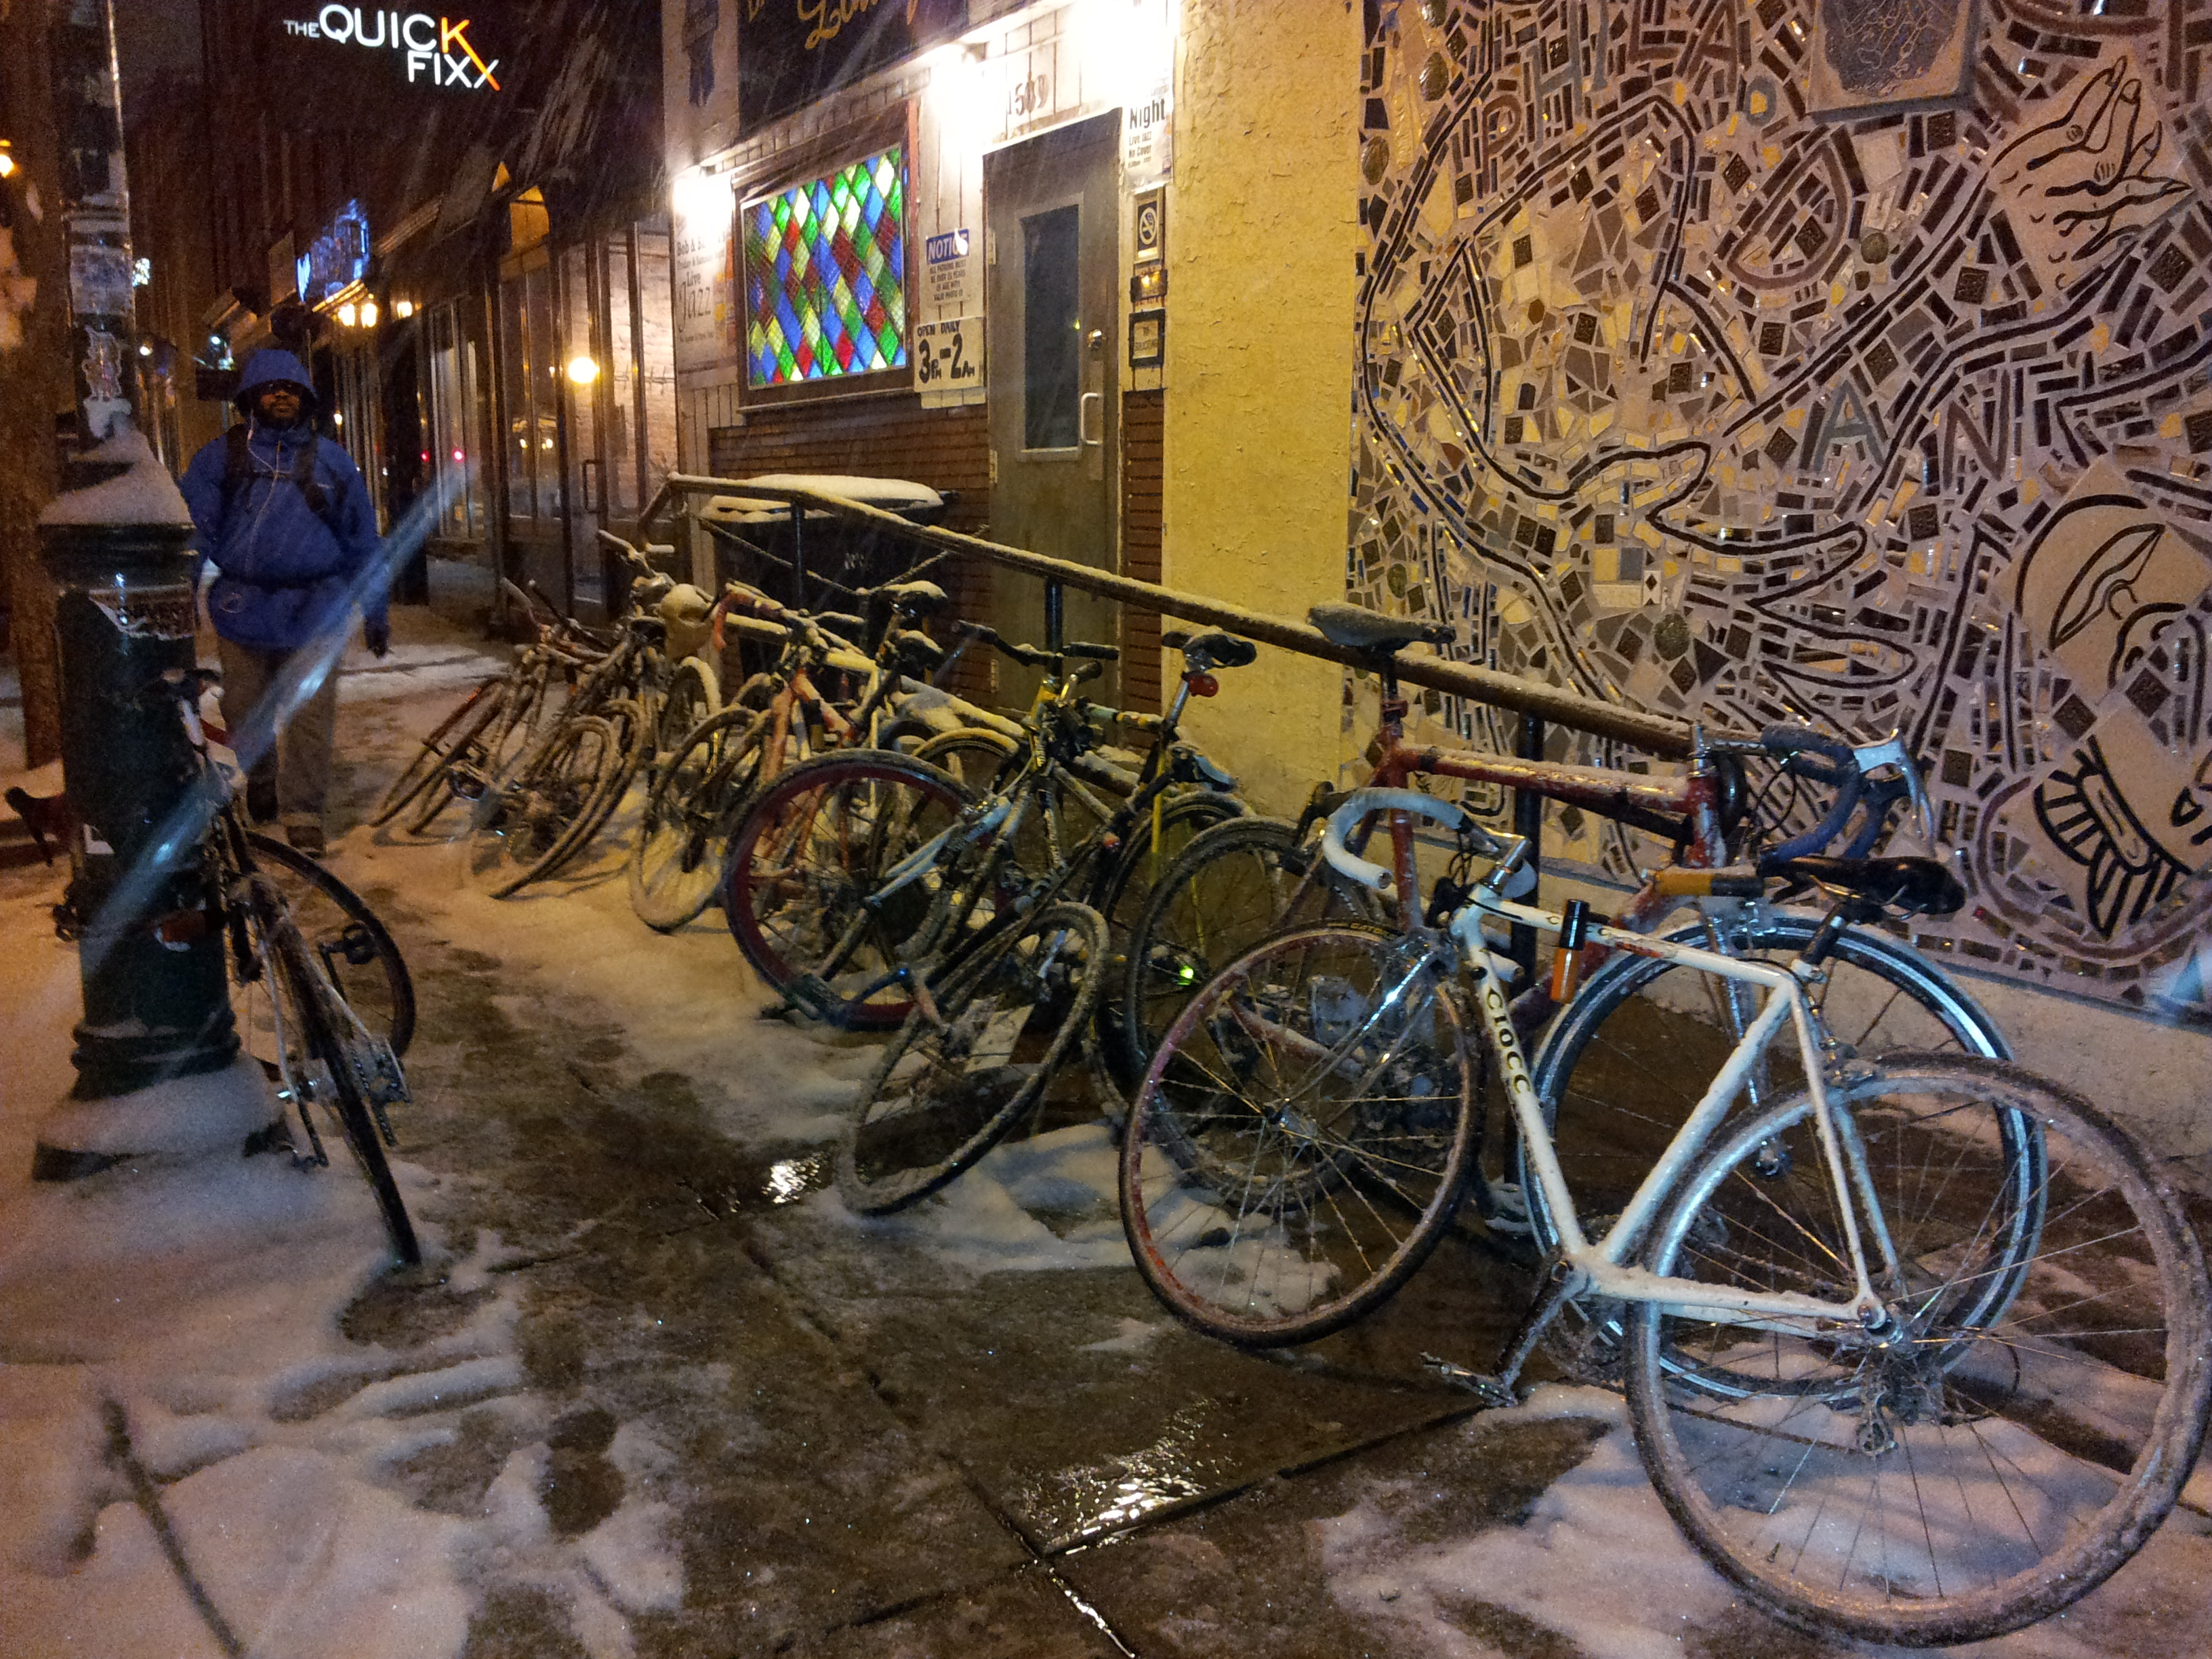 Bike pile up on B&B's ramp in the snow, 2013 | Marcus Ferreira